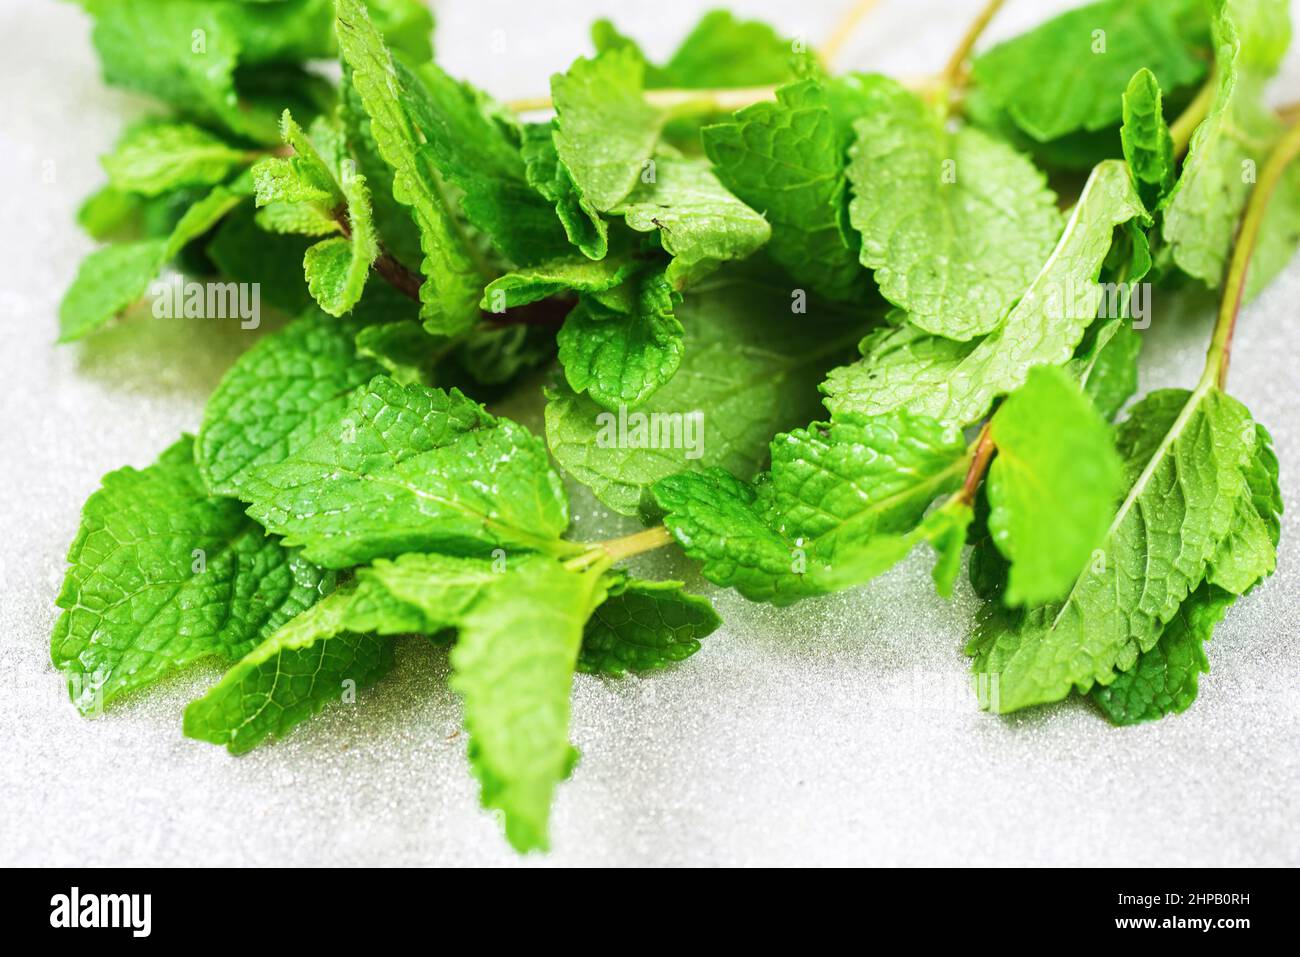 Bunch of mentha (mint) leaf on silver background. Closeup. Stock Photo